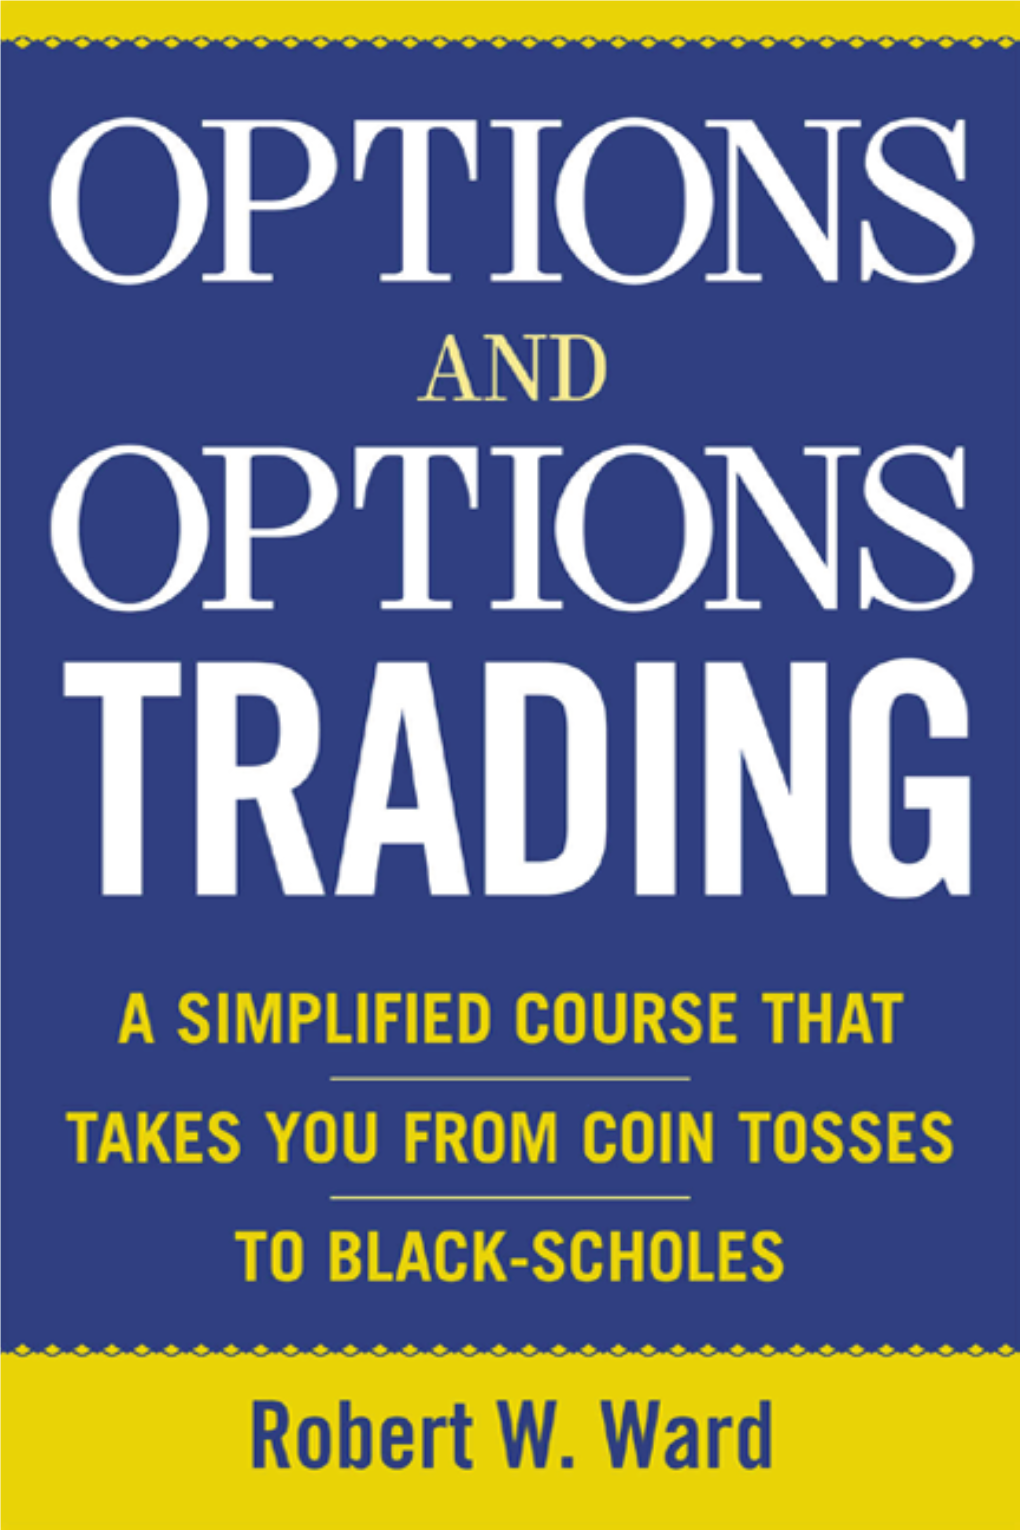 Options and Options Trading a Simplified Course.Pdf